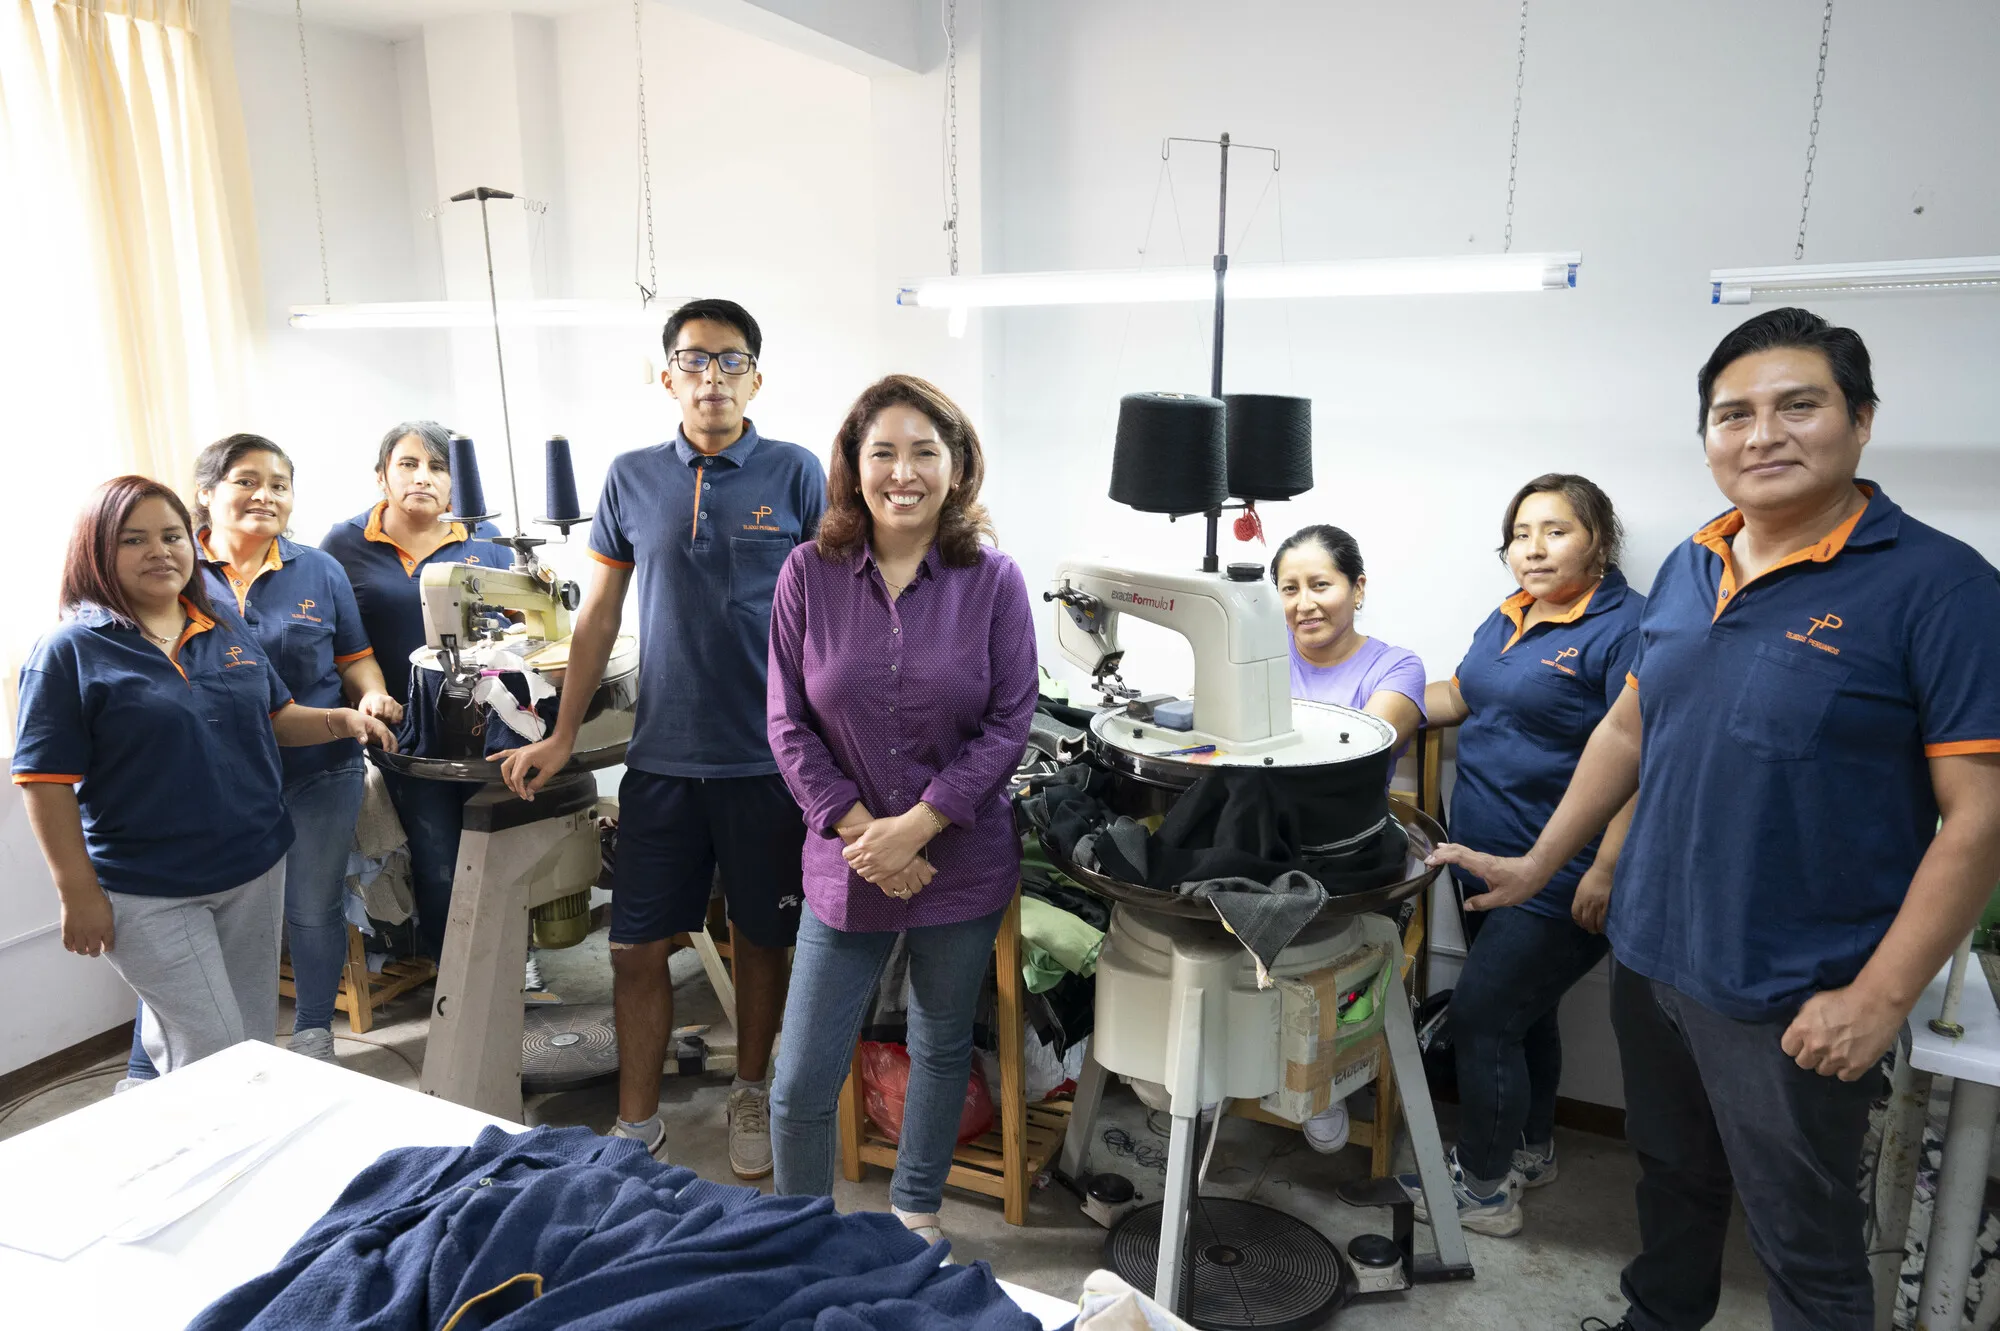 Violeta Mejia surrounded by her employees in an indoor workshop space.